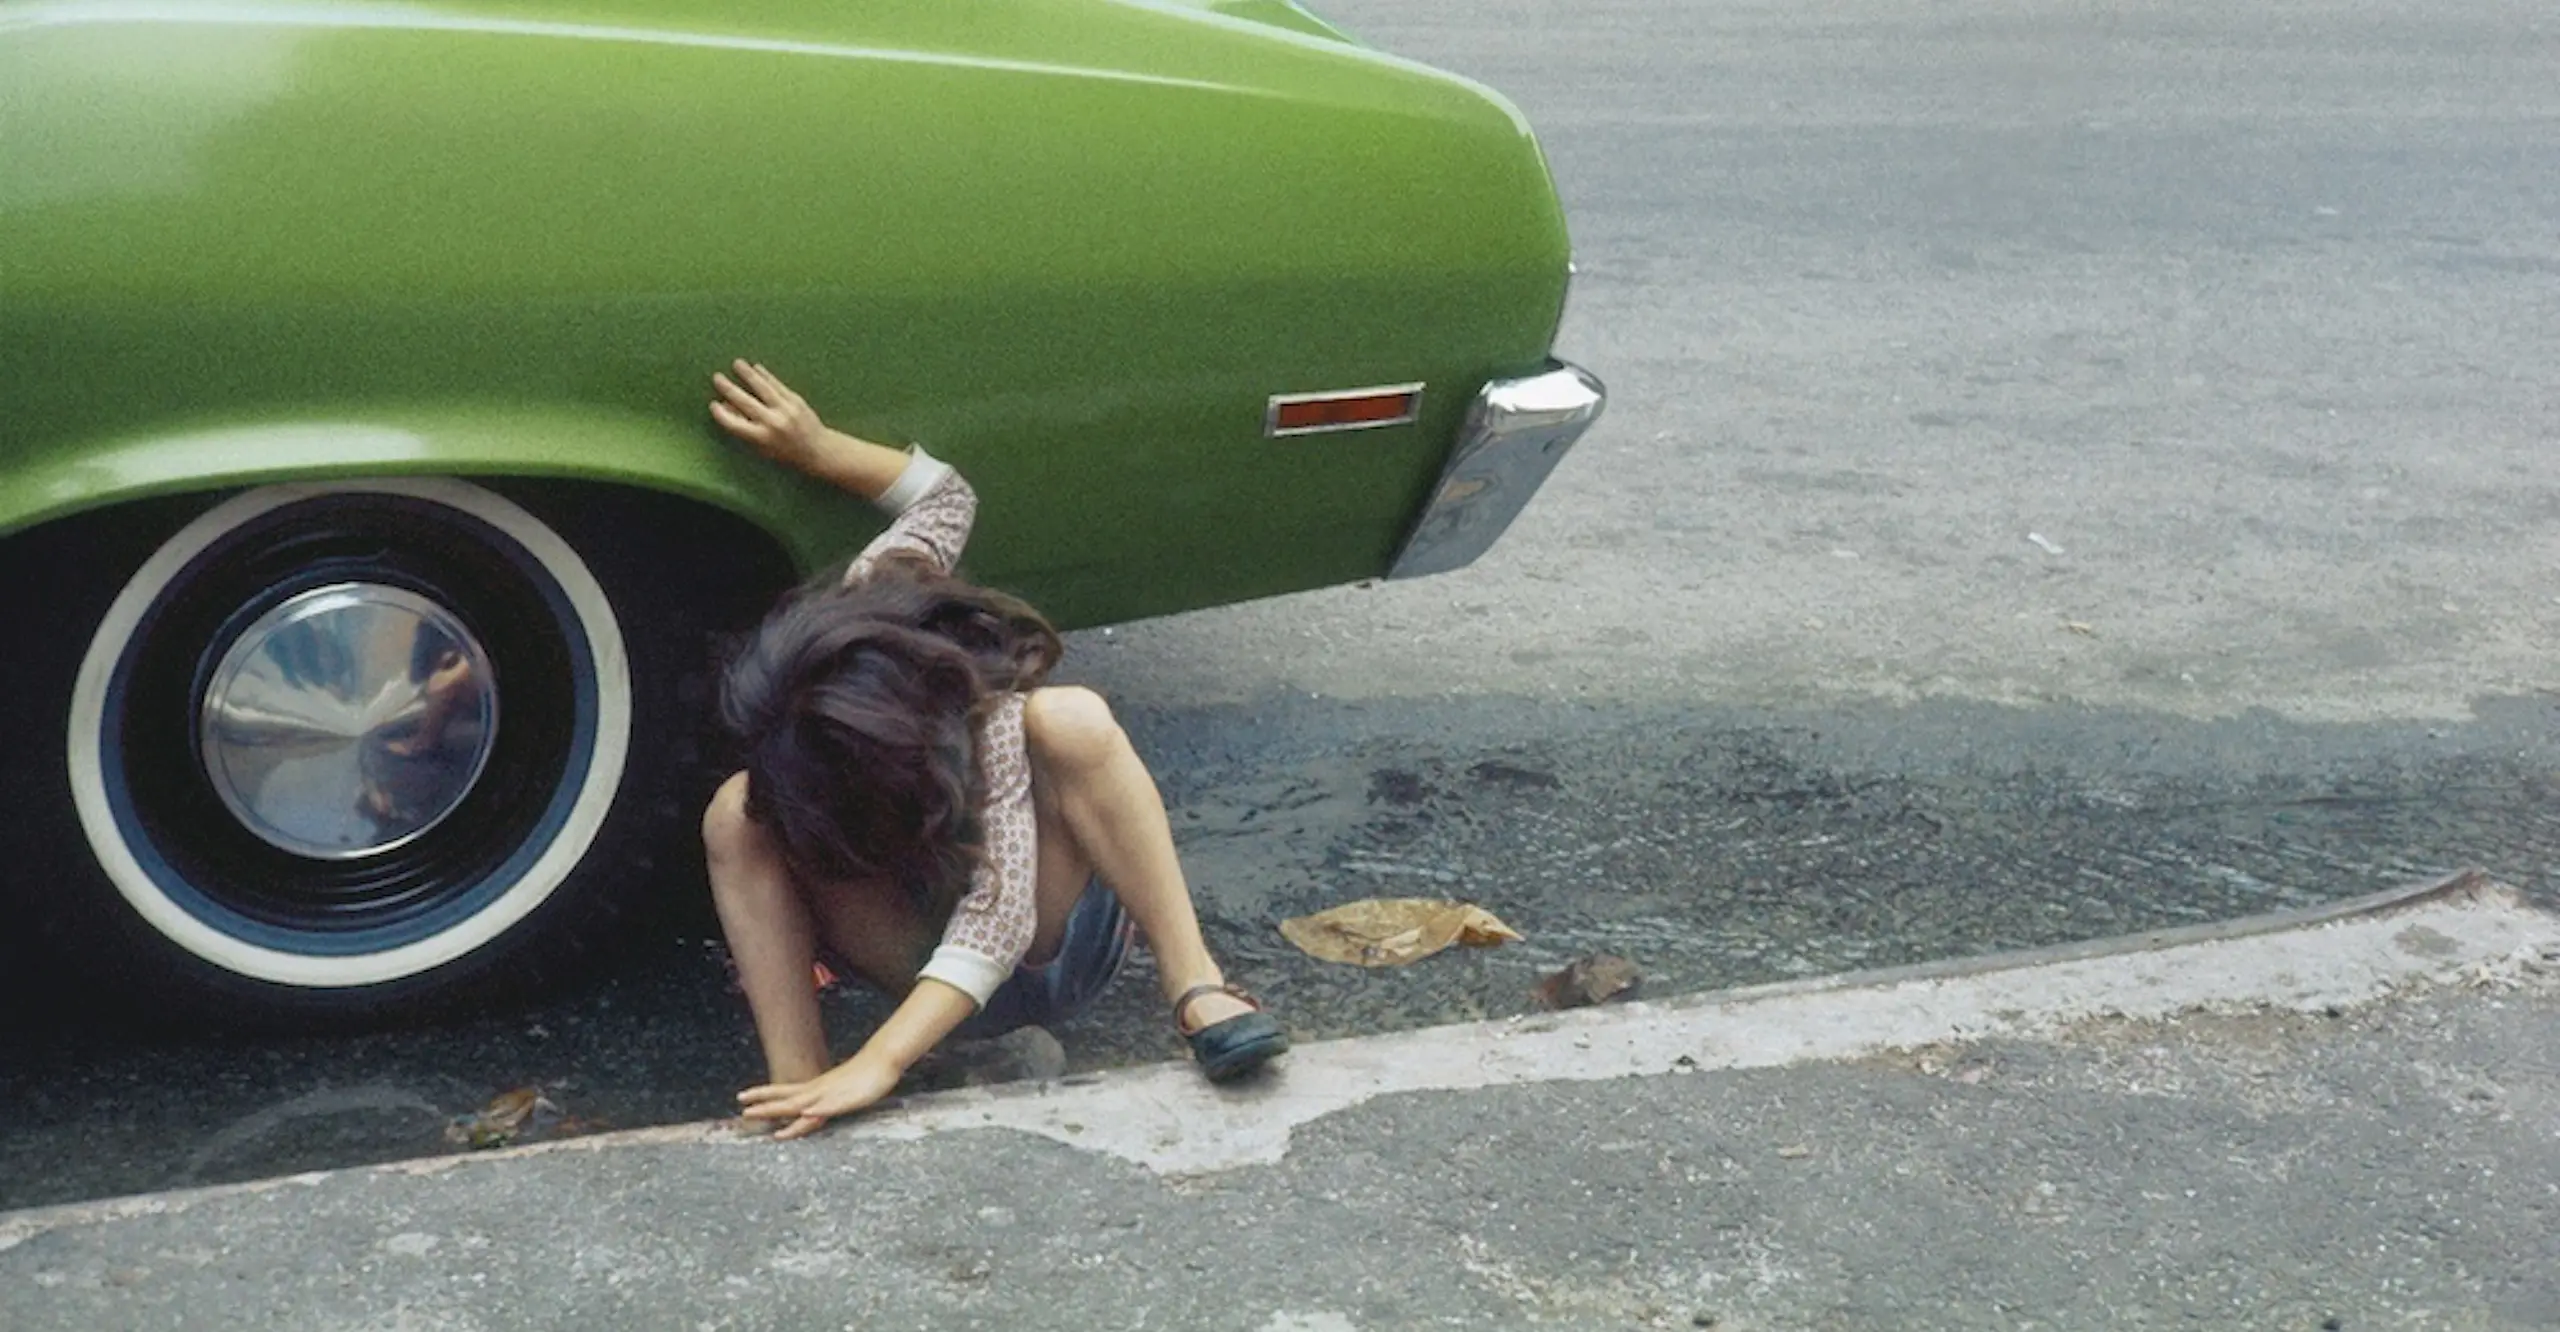 A girl squats beside the rear tyre of an avocado green car, body and face twisted away from the camera.